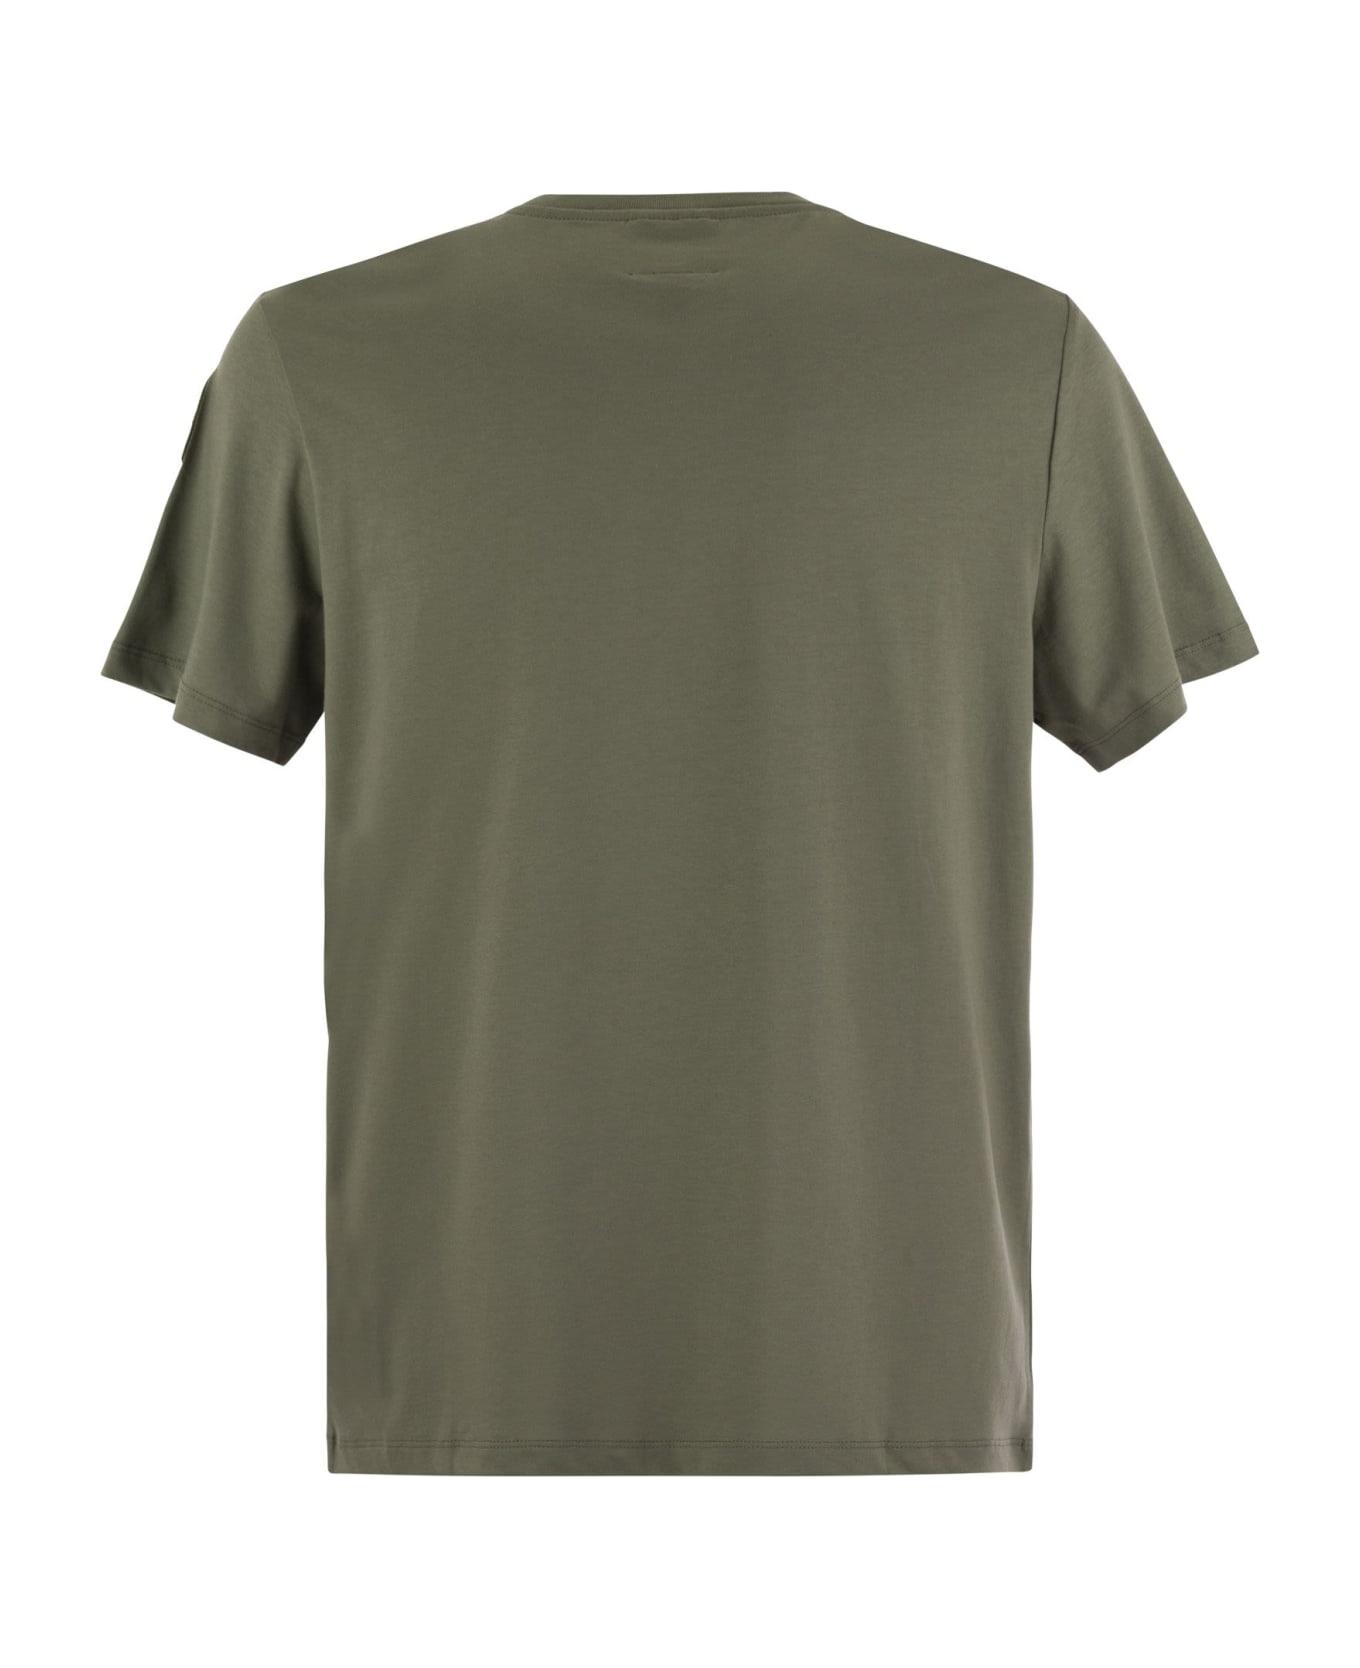 Parajumpers Shispare Tee - Cotton Jersey T-shirt - Military Green